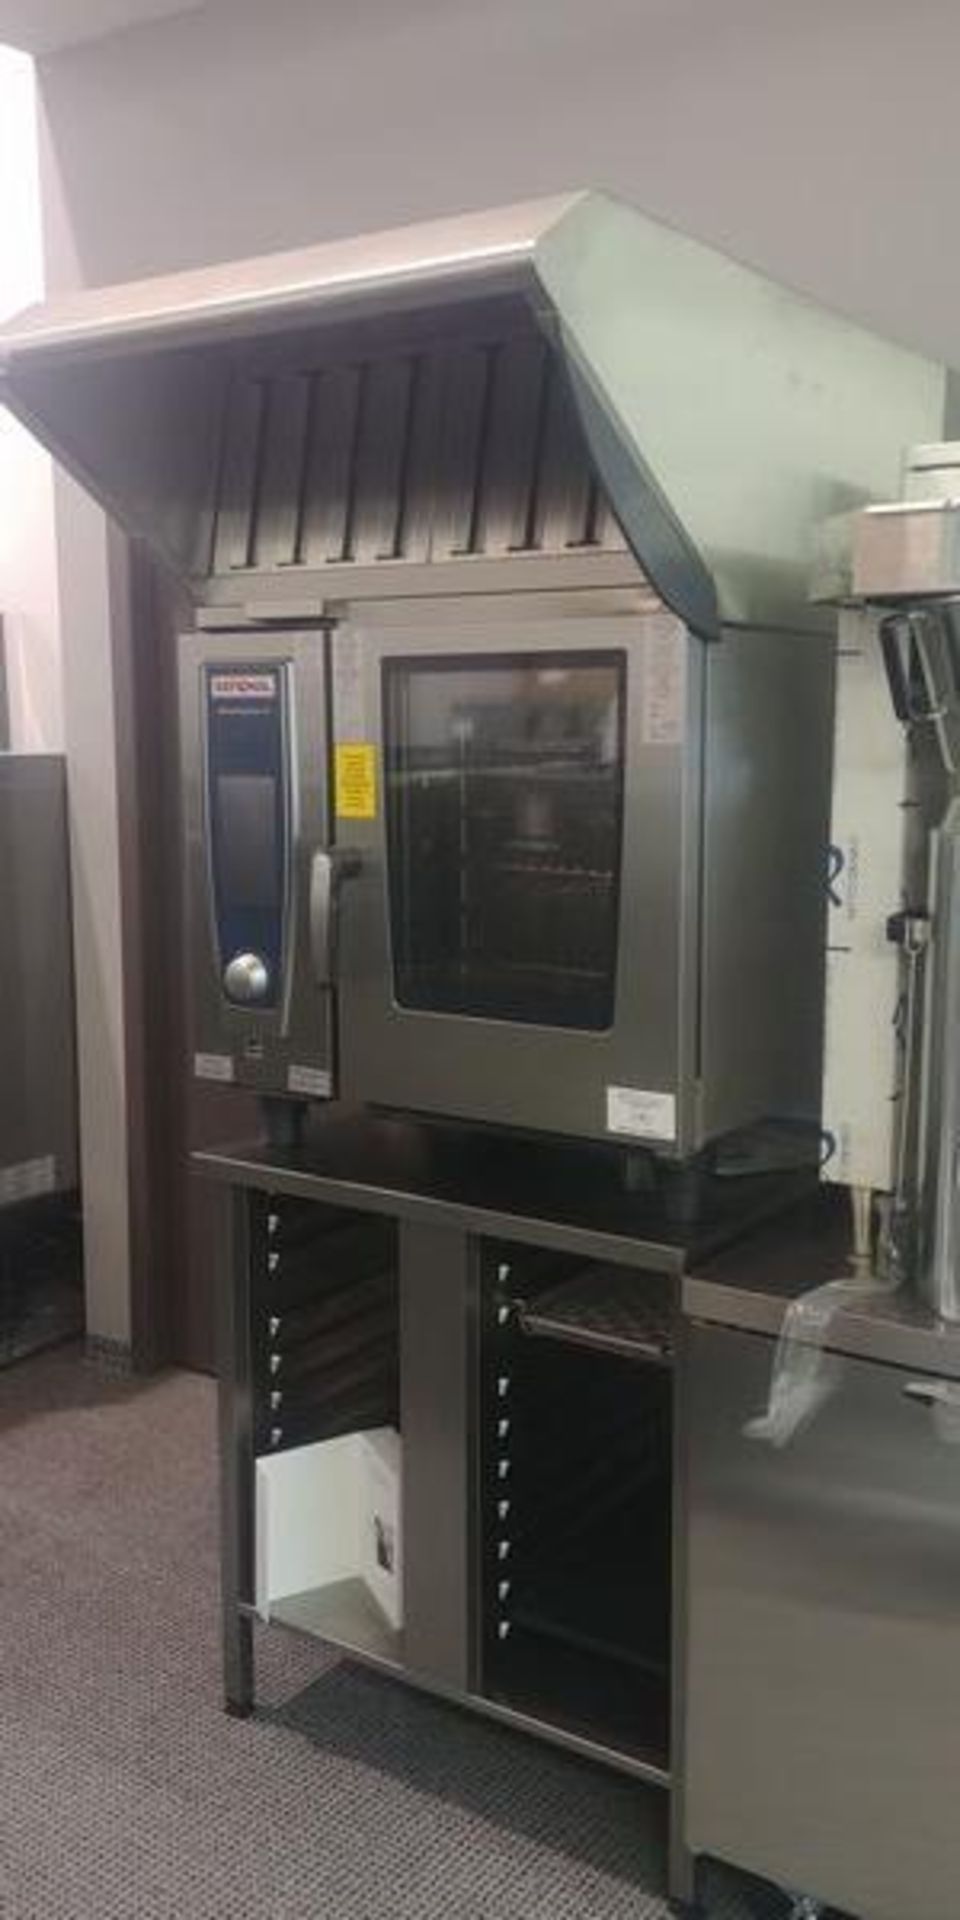 Rational Self Cooking Center Combi Oven Model SCCWE61- Complete with Stand, Ventless Hood & Manuals